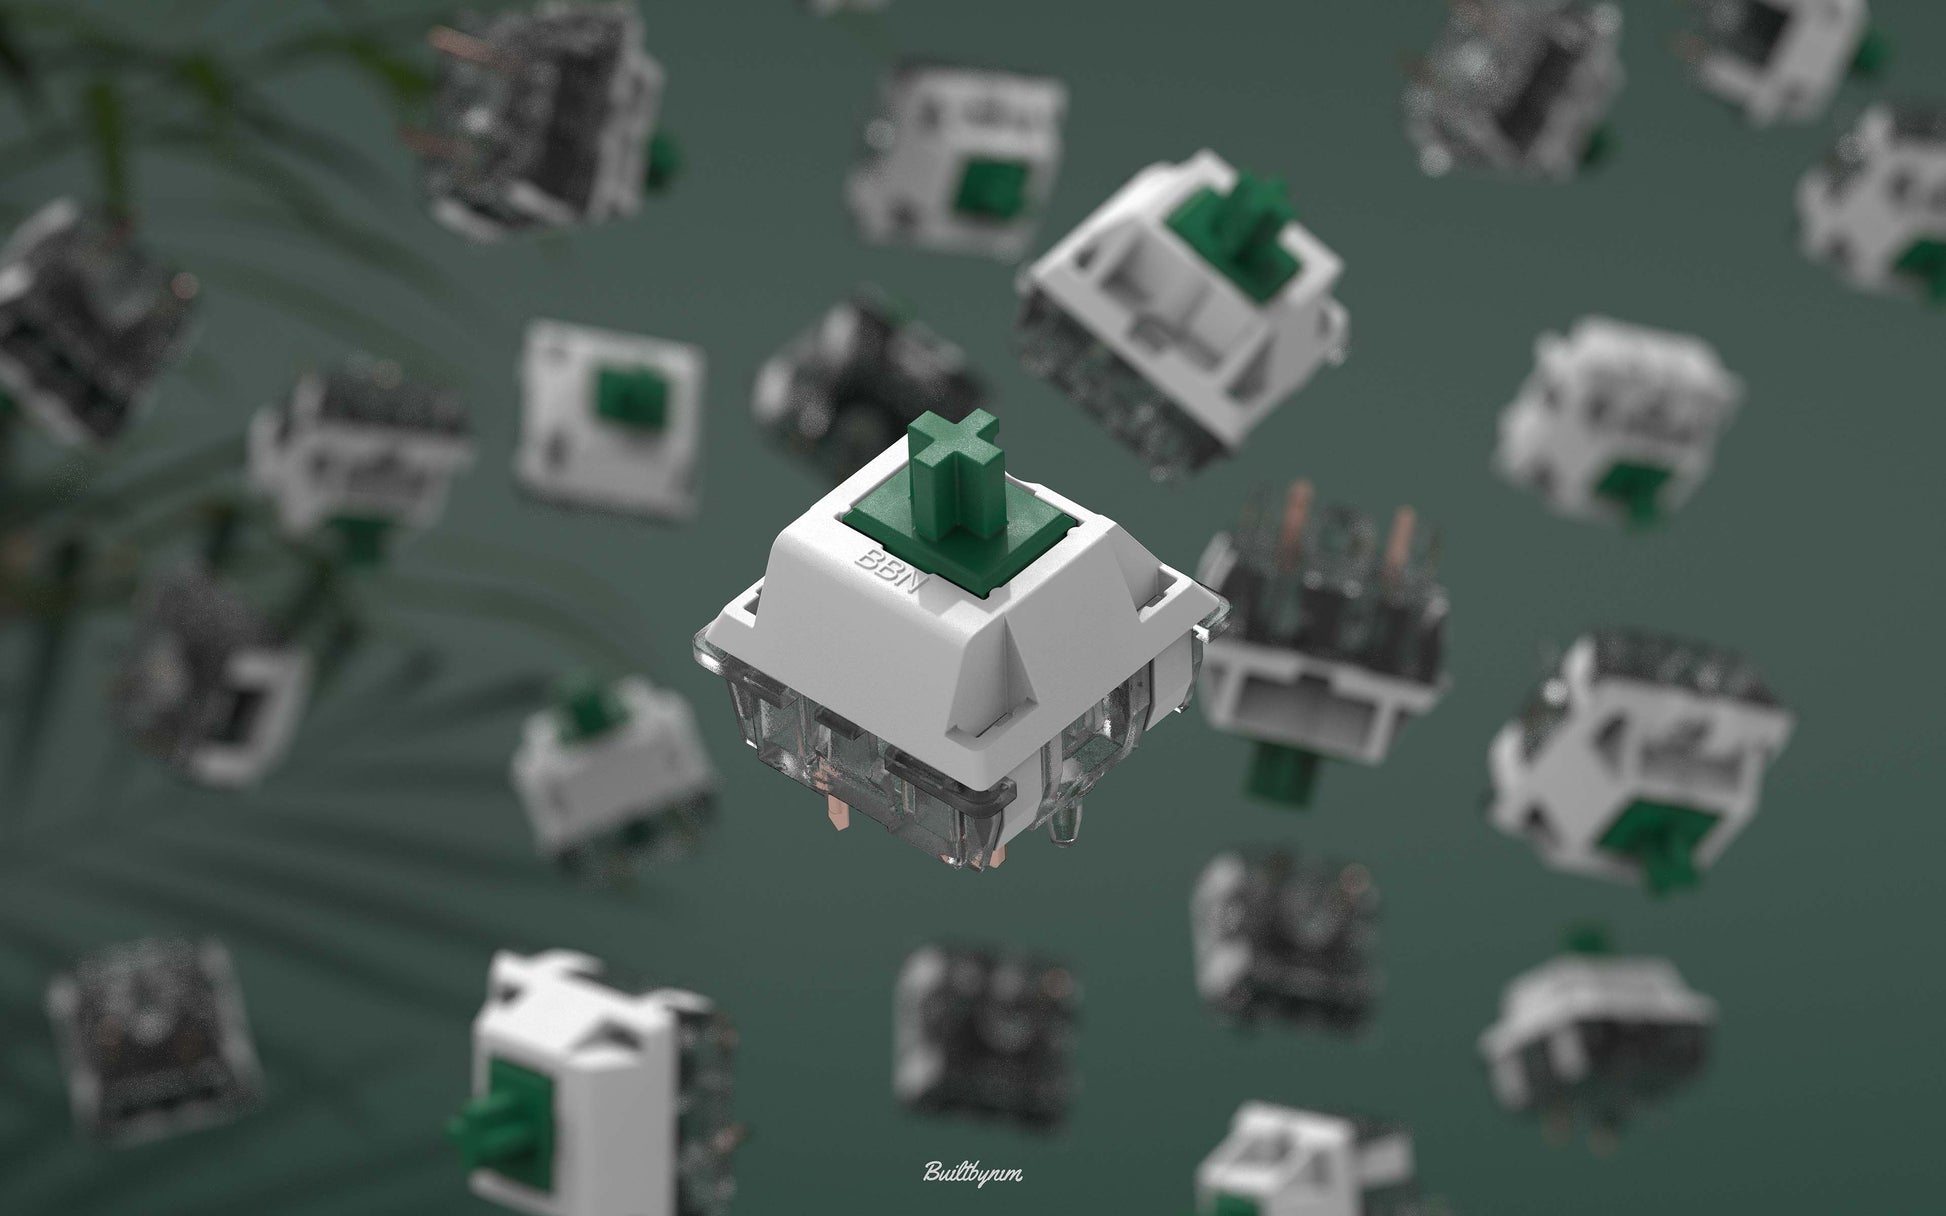 Close-up shot of a BBN Linear mechanical keyboard switch with an assortment of BBN Linear switches falling behind it with a green background and stringy plant leaves on the left